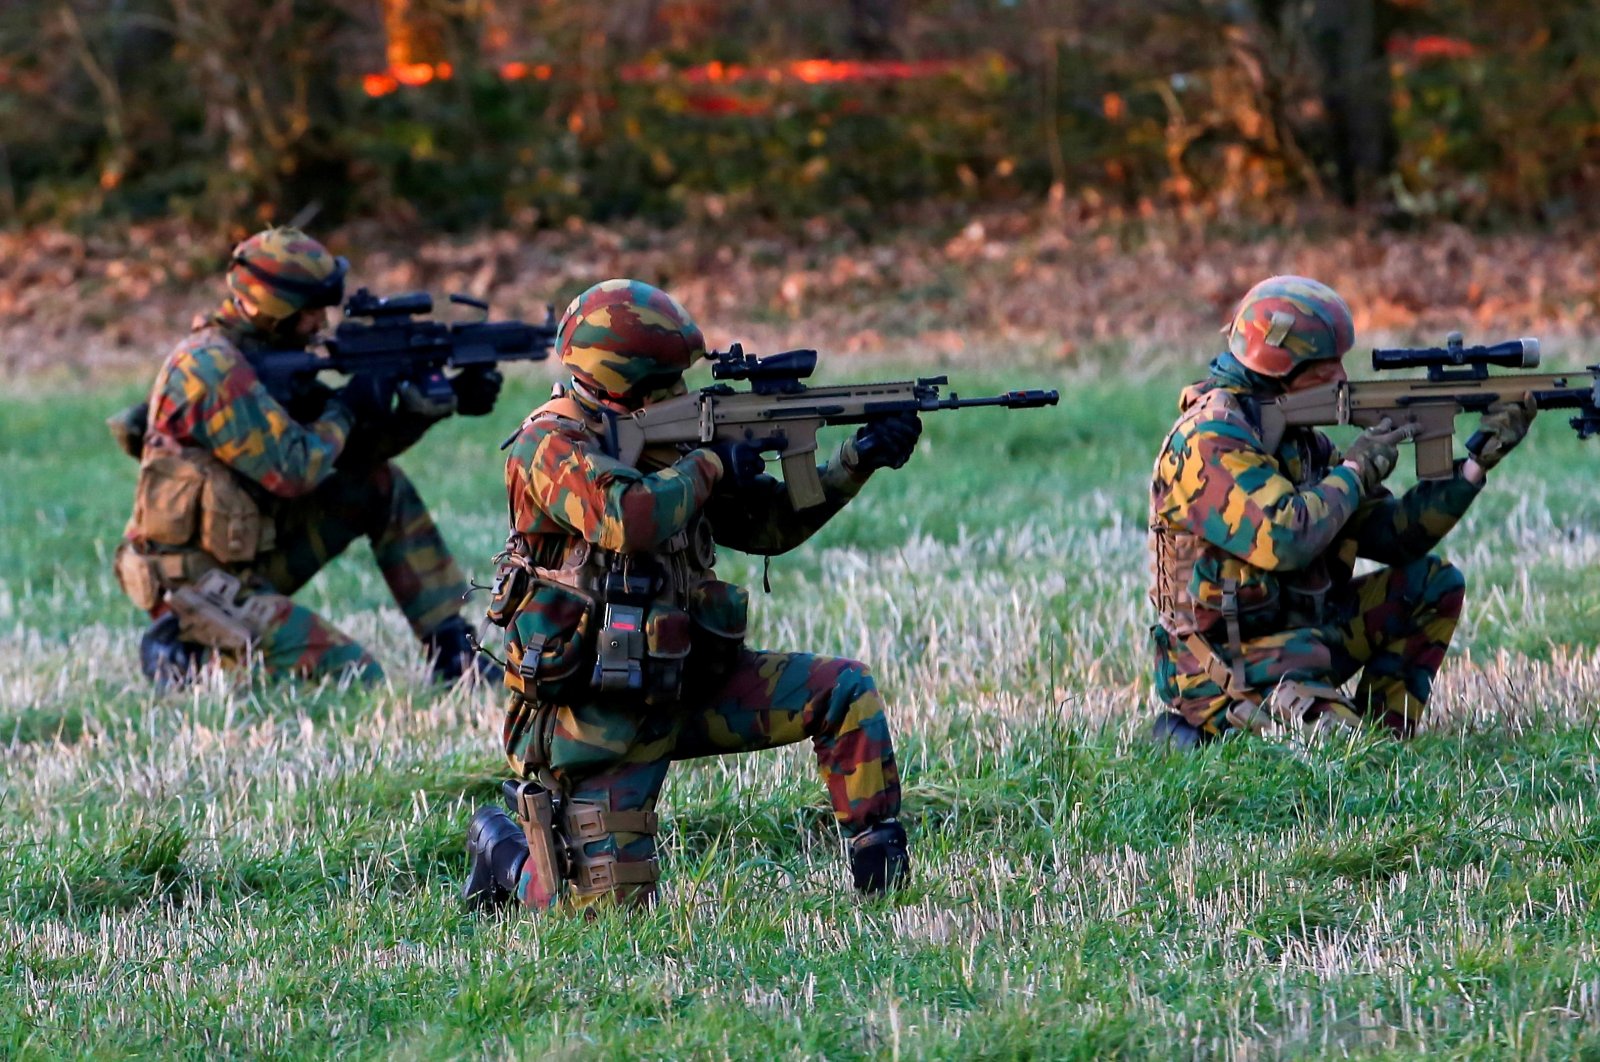 Belgian Army Special Forces are seen during the Black Blade military exercise involving several European Union countries and organized by the European Defense Agency at Florennes Air Base, Belgium, Nov. 30, 2016. (Reuters Photo)